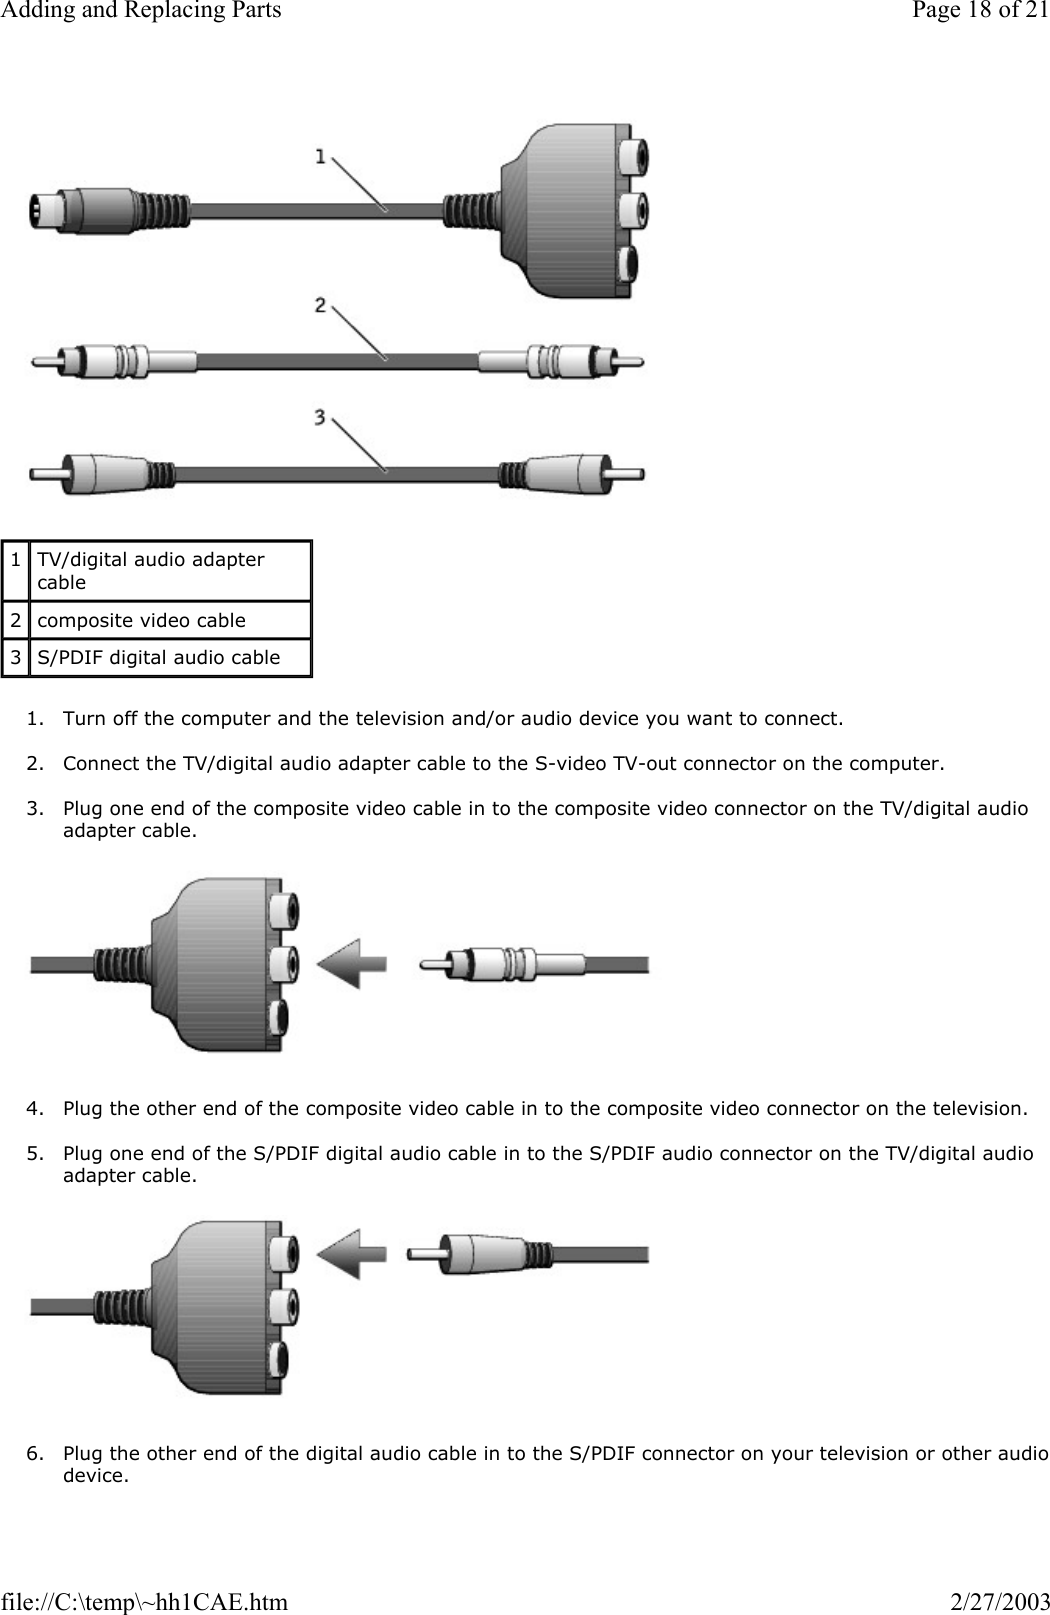   1. Turn off the computer and the television and/or audio device you want to connect.  2. Connect the TV/digital audio adapter cable to the S-video TV-out connector on the computer.  3. Plug one end of the composite video cable in to the composite video connector on the TV/digital audio adapter cable.    4. Plug the other end of the composite video cable in to the composite video connector on the television.  5. Plug one end of the S/PDIF digital audio cable in to the S/PDIF audio connector on the TV/digital audio adapter cable.    6. Plug the other end of the digital audio cable in to the S/PDIF connector on your television or other audiodevice. 1  TV/digital audio adapter cable 2  composite video cable 3  S/PDIF digital audio cable Page 18 of 21Adding and Replacing Parts2/27/2003file://C:\temp\~hh1CAE.htm